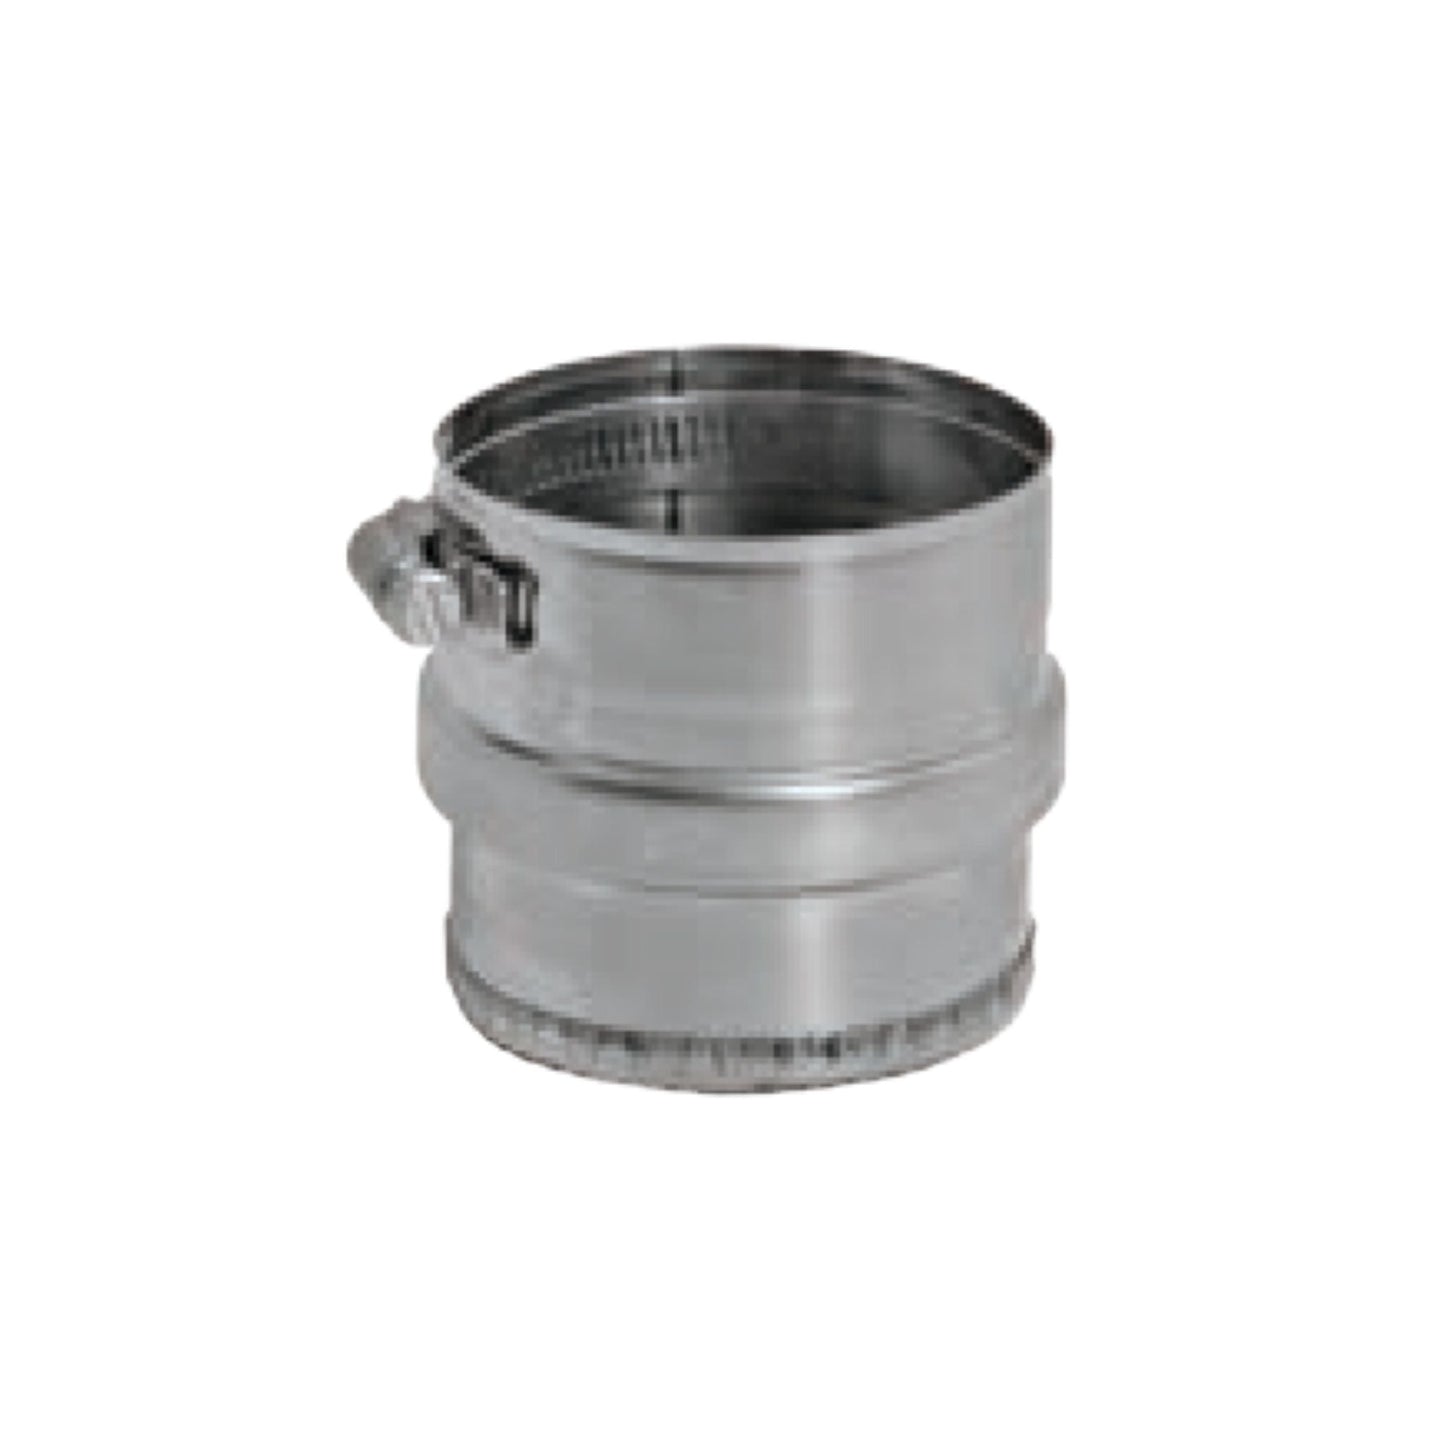 DuraVent FasNSeal 6" 29-4C Stainless Steel Tee Cap